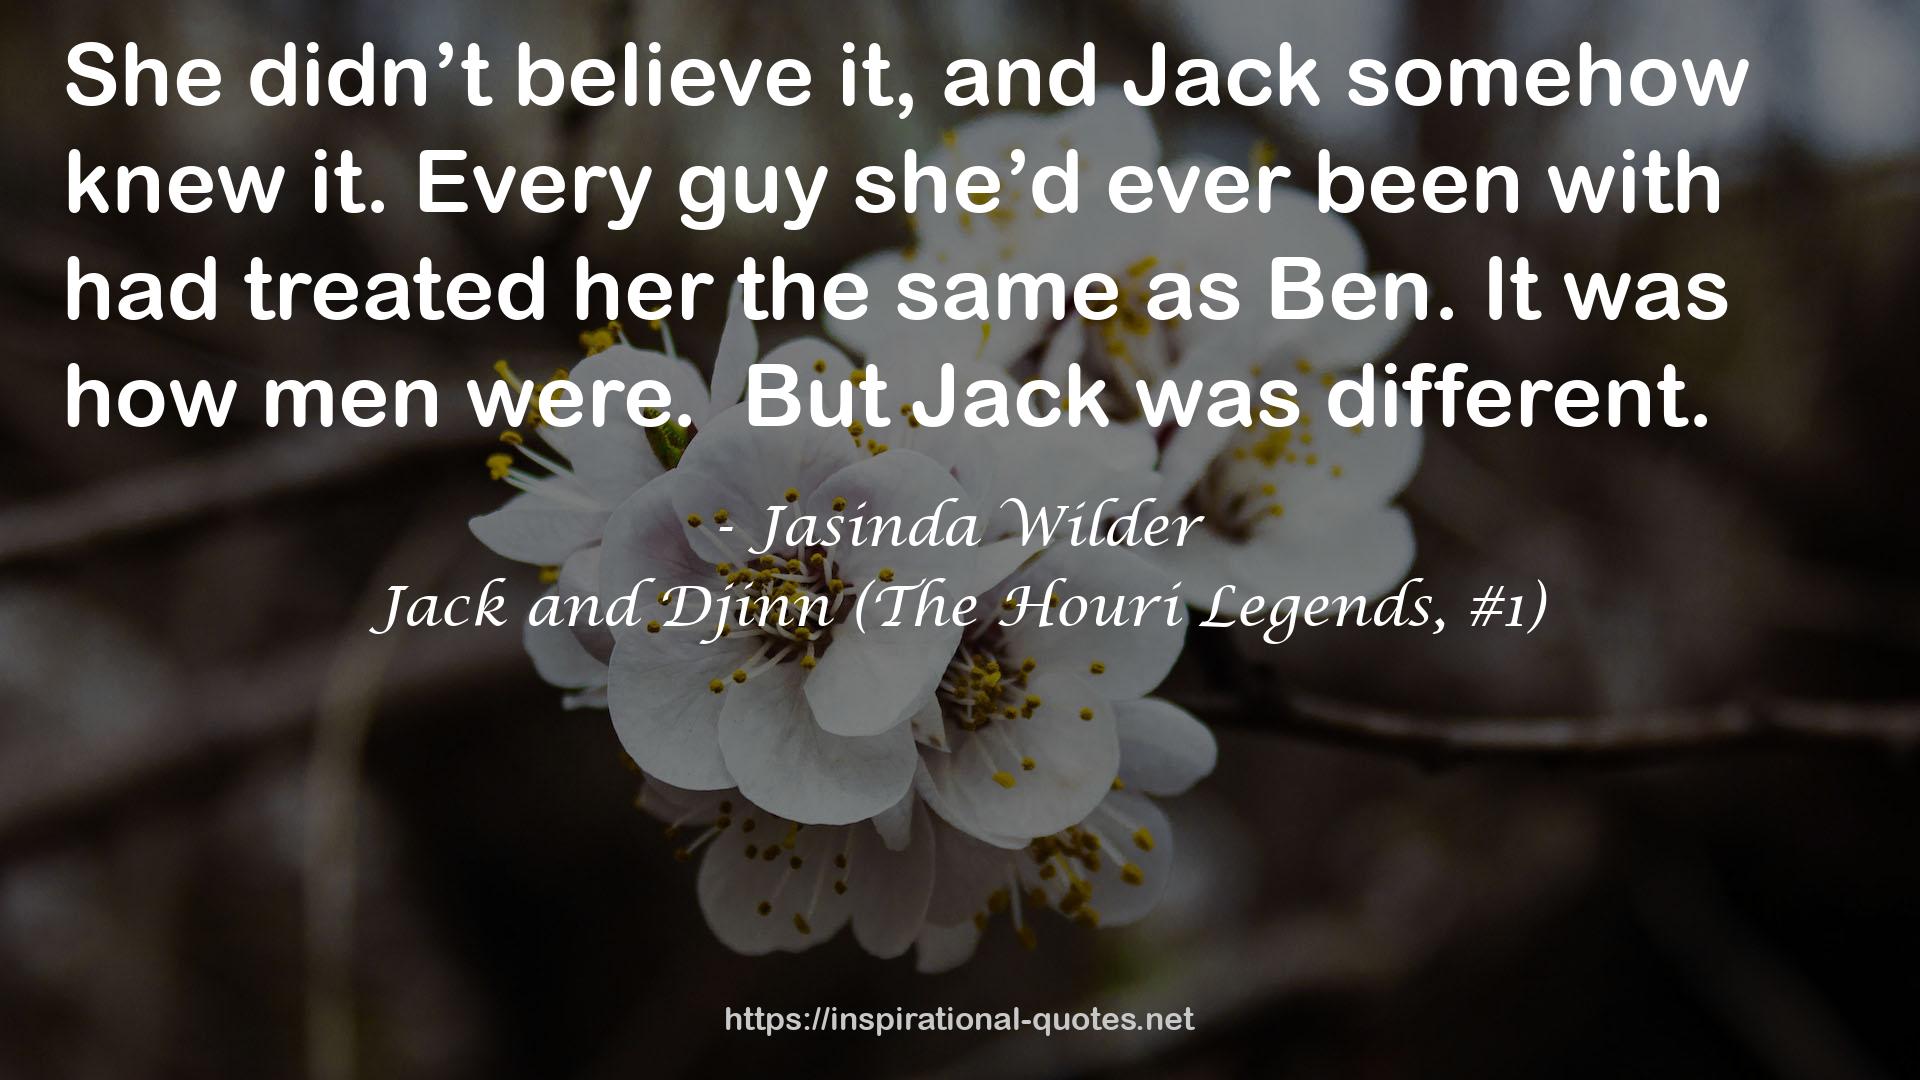 Jack and Djinn (The Houri Legends, #1) QUOTES